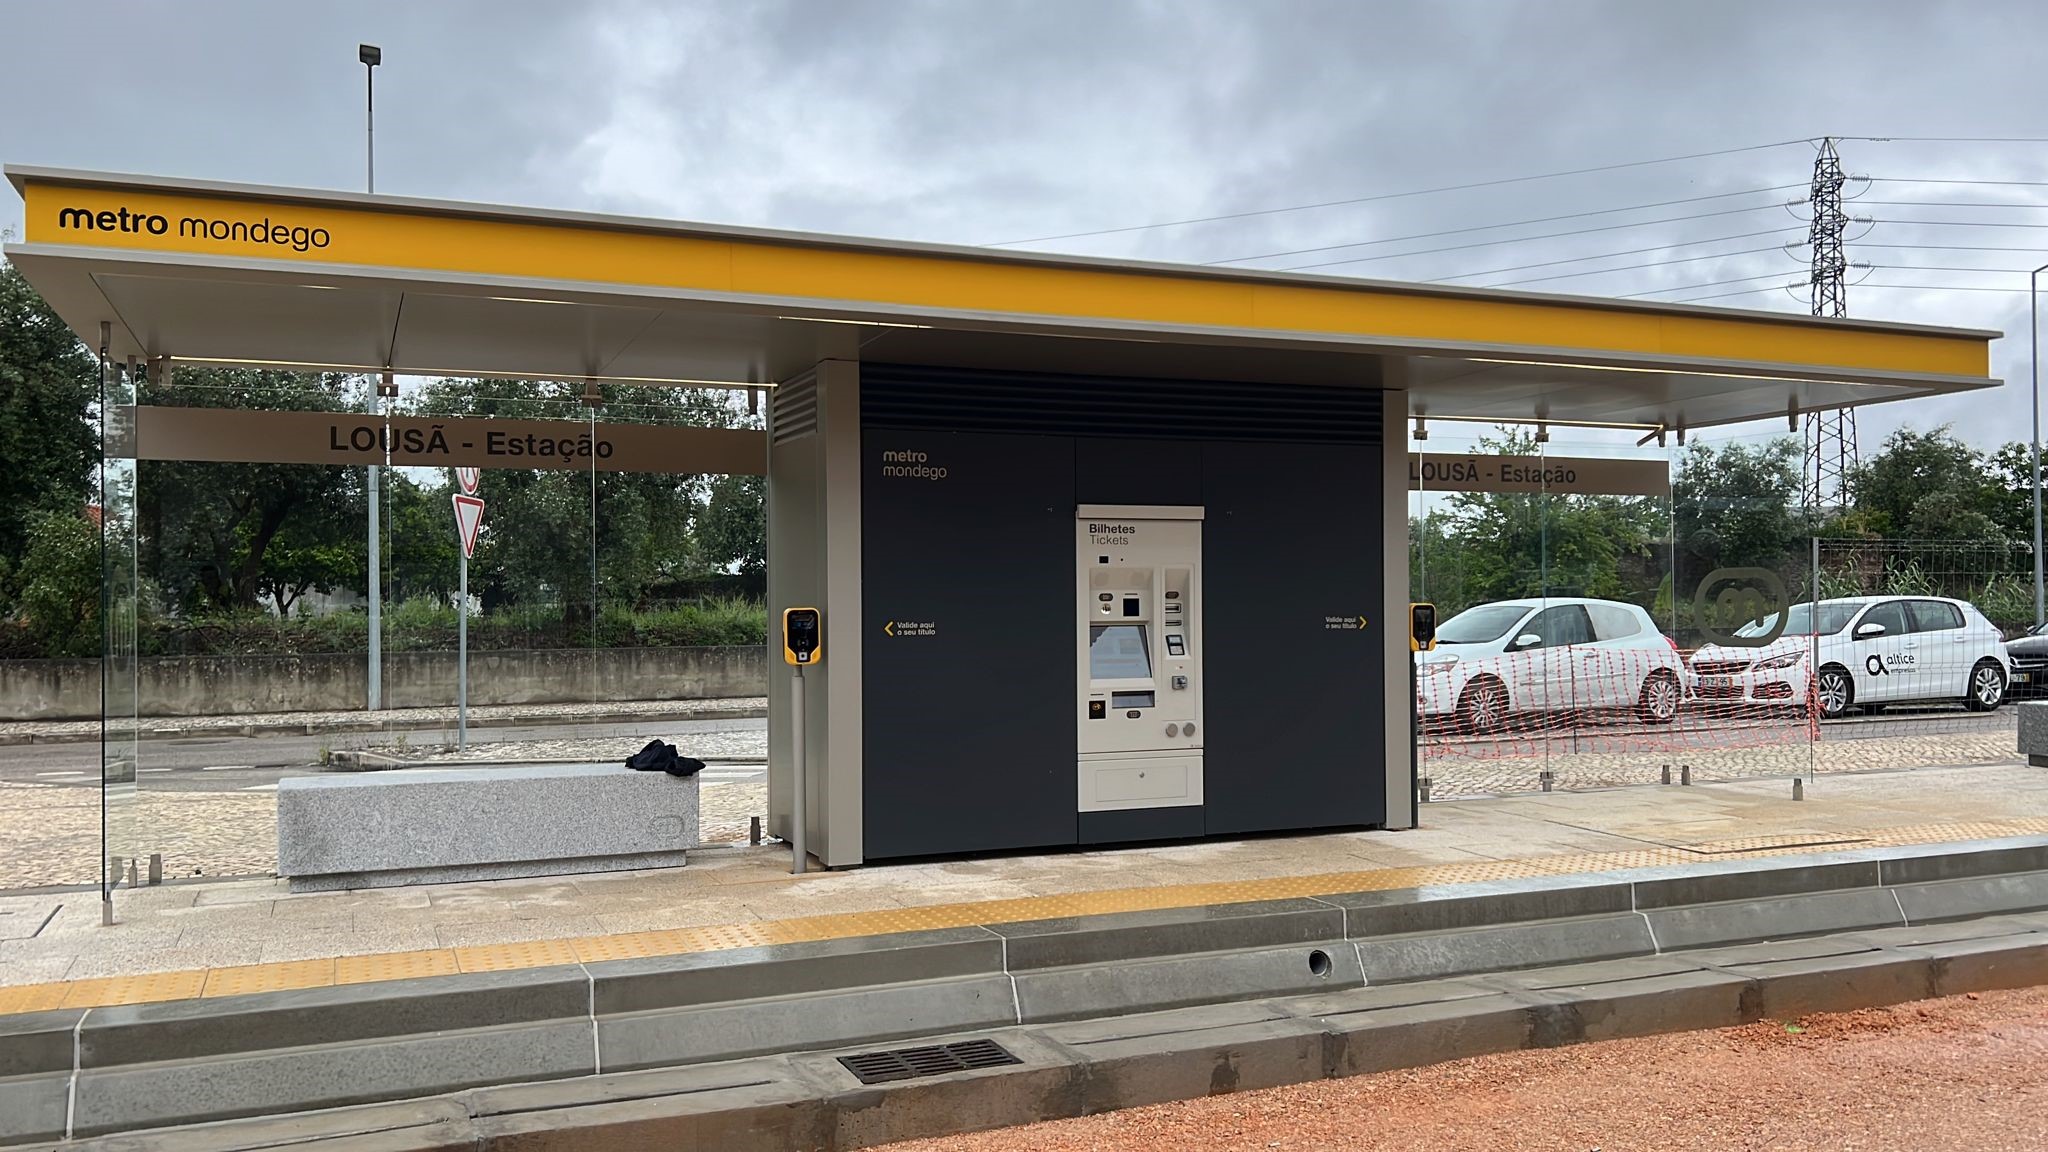 Prototype of the TVM and Validators installed in a Shelter at the Metrobus Stations (Coimbra) took place